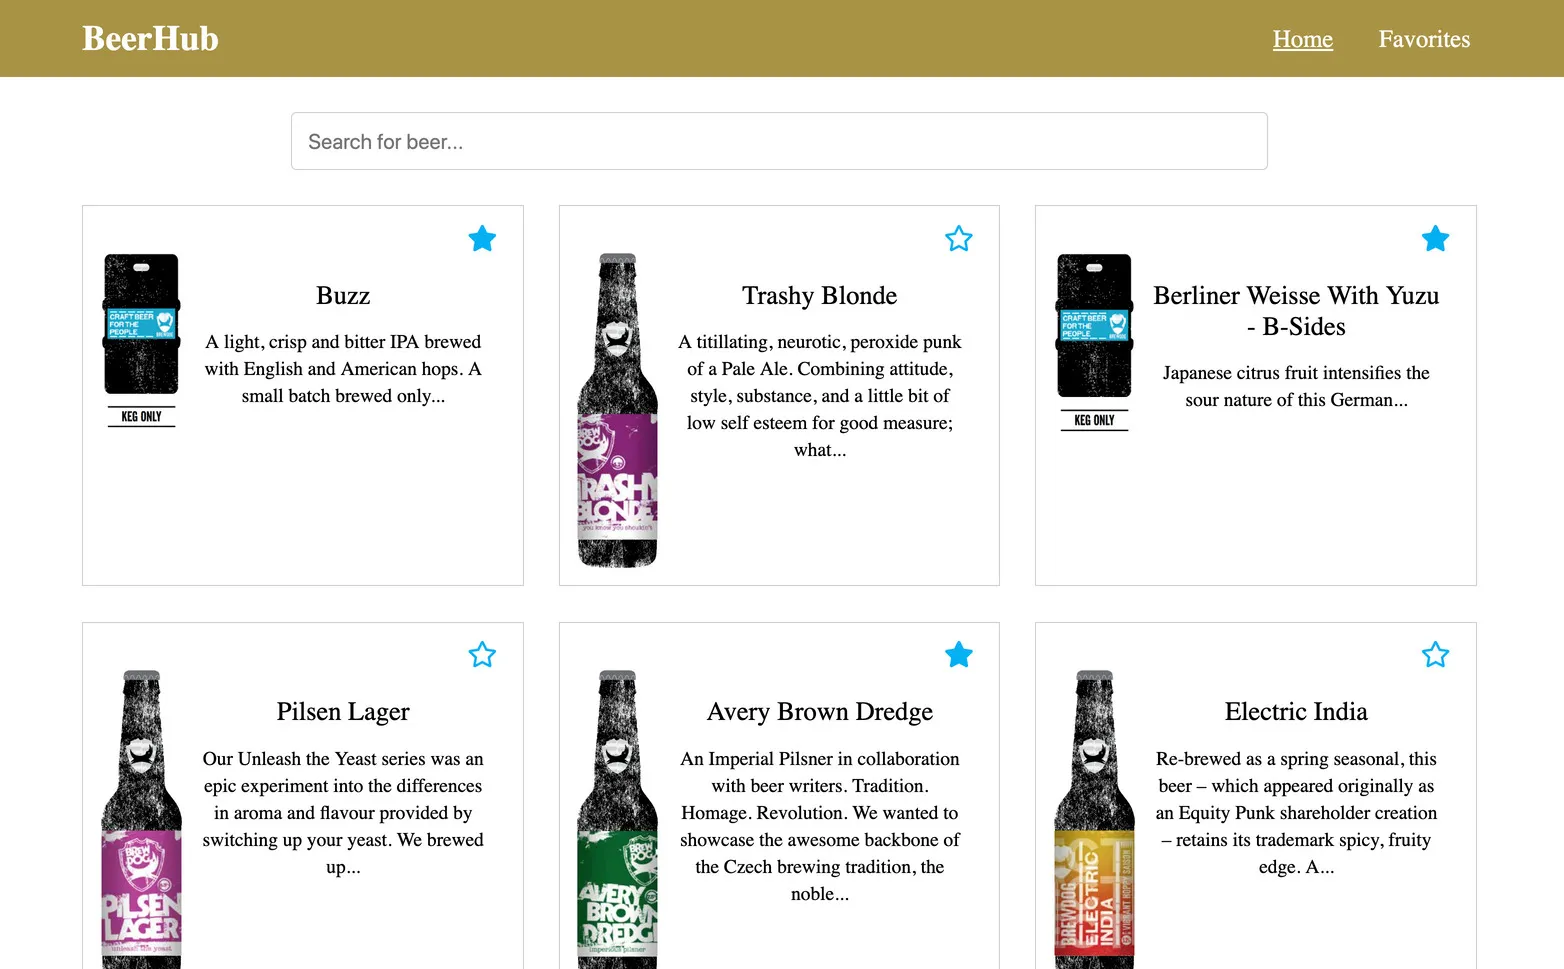 Dashboard showing the name and description of several beers